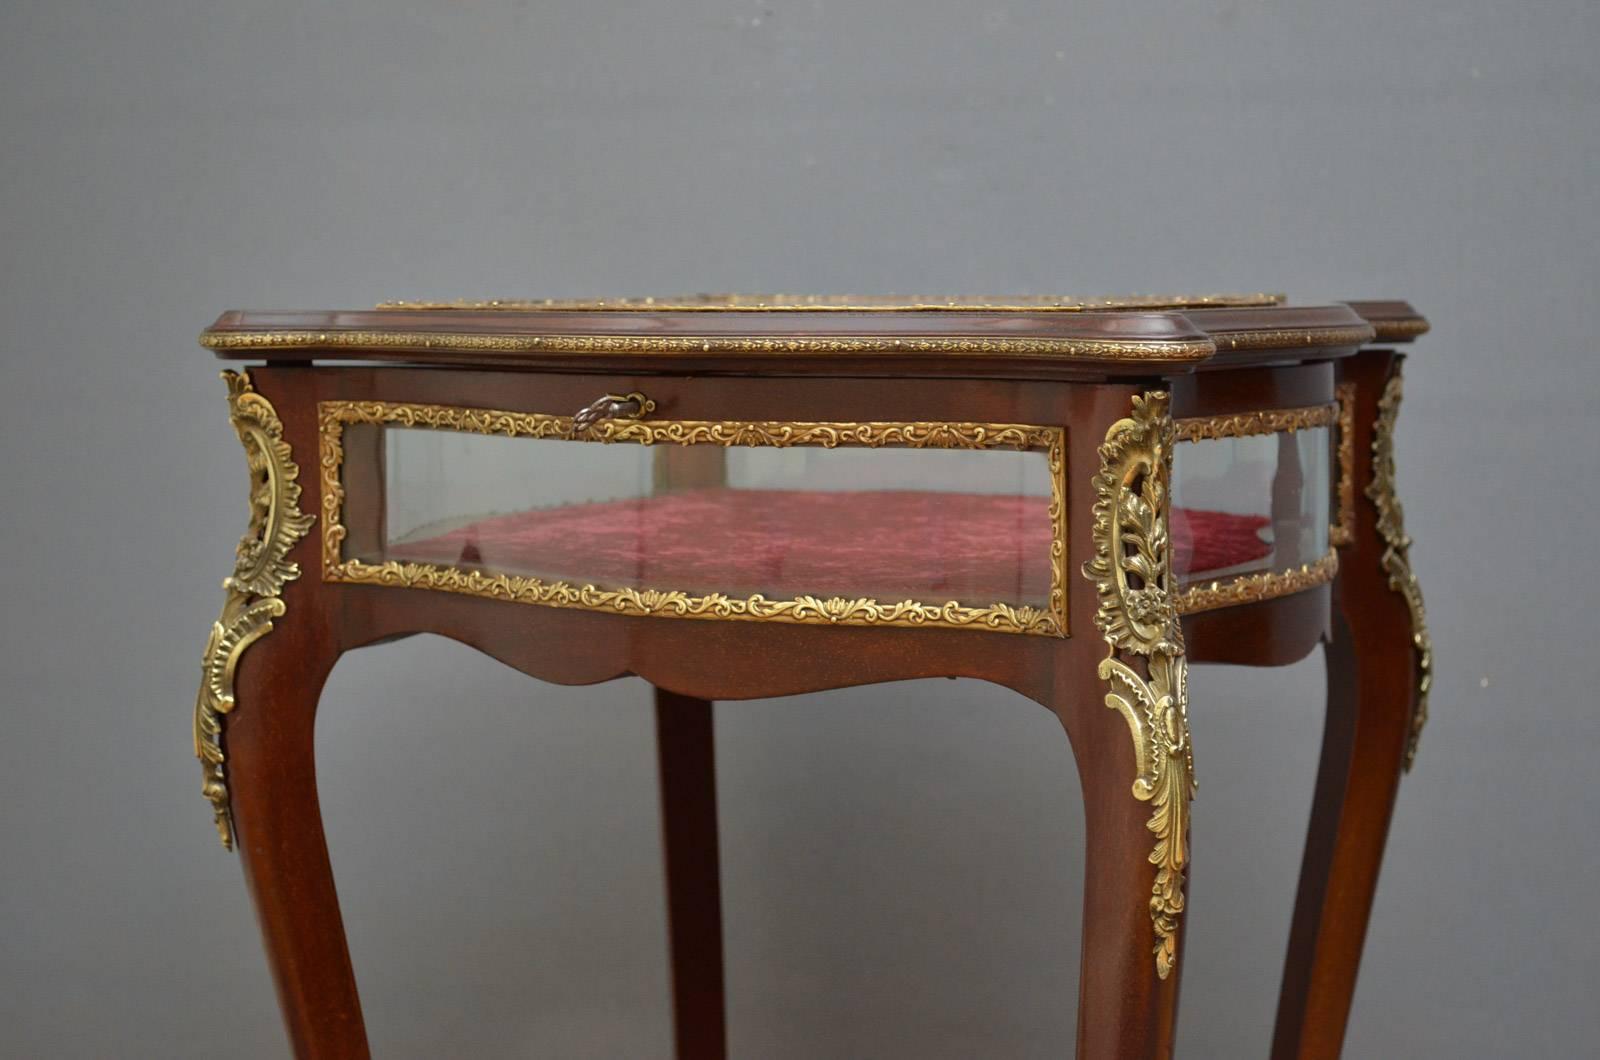 Exceptional Edwardian Mahogany Bijouterie Table In Excellent Condition For Sale In Whaley Bridge, GB